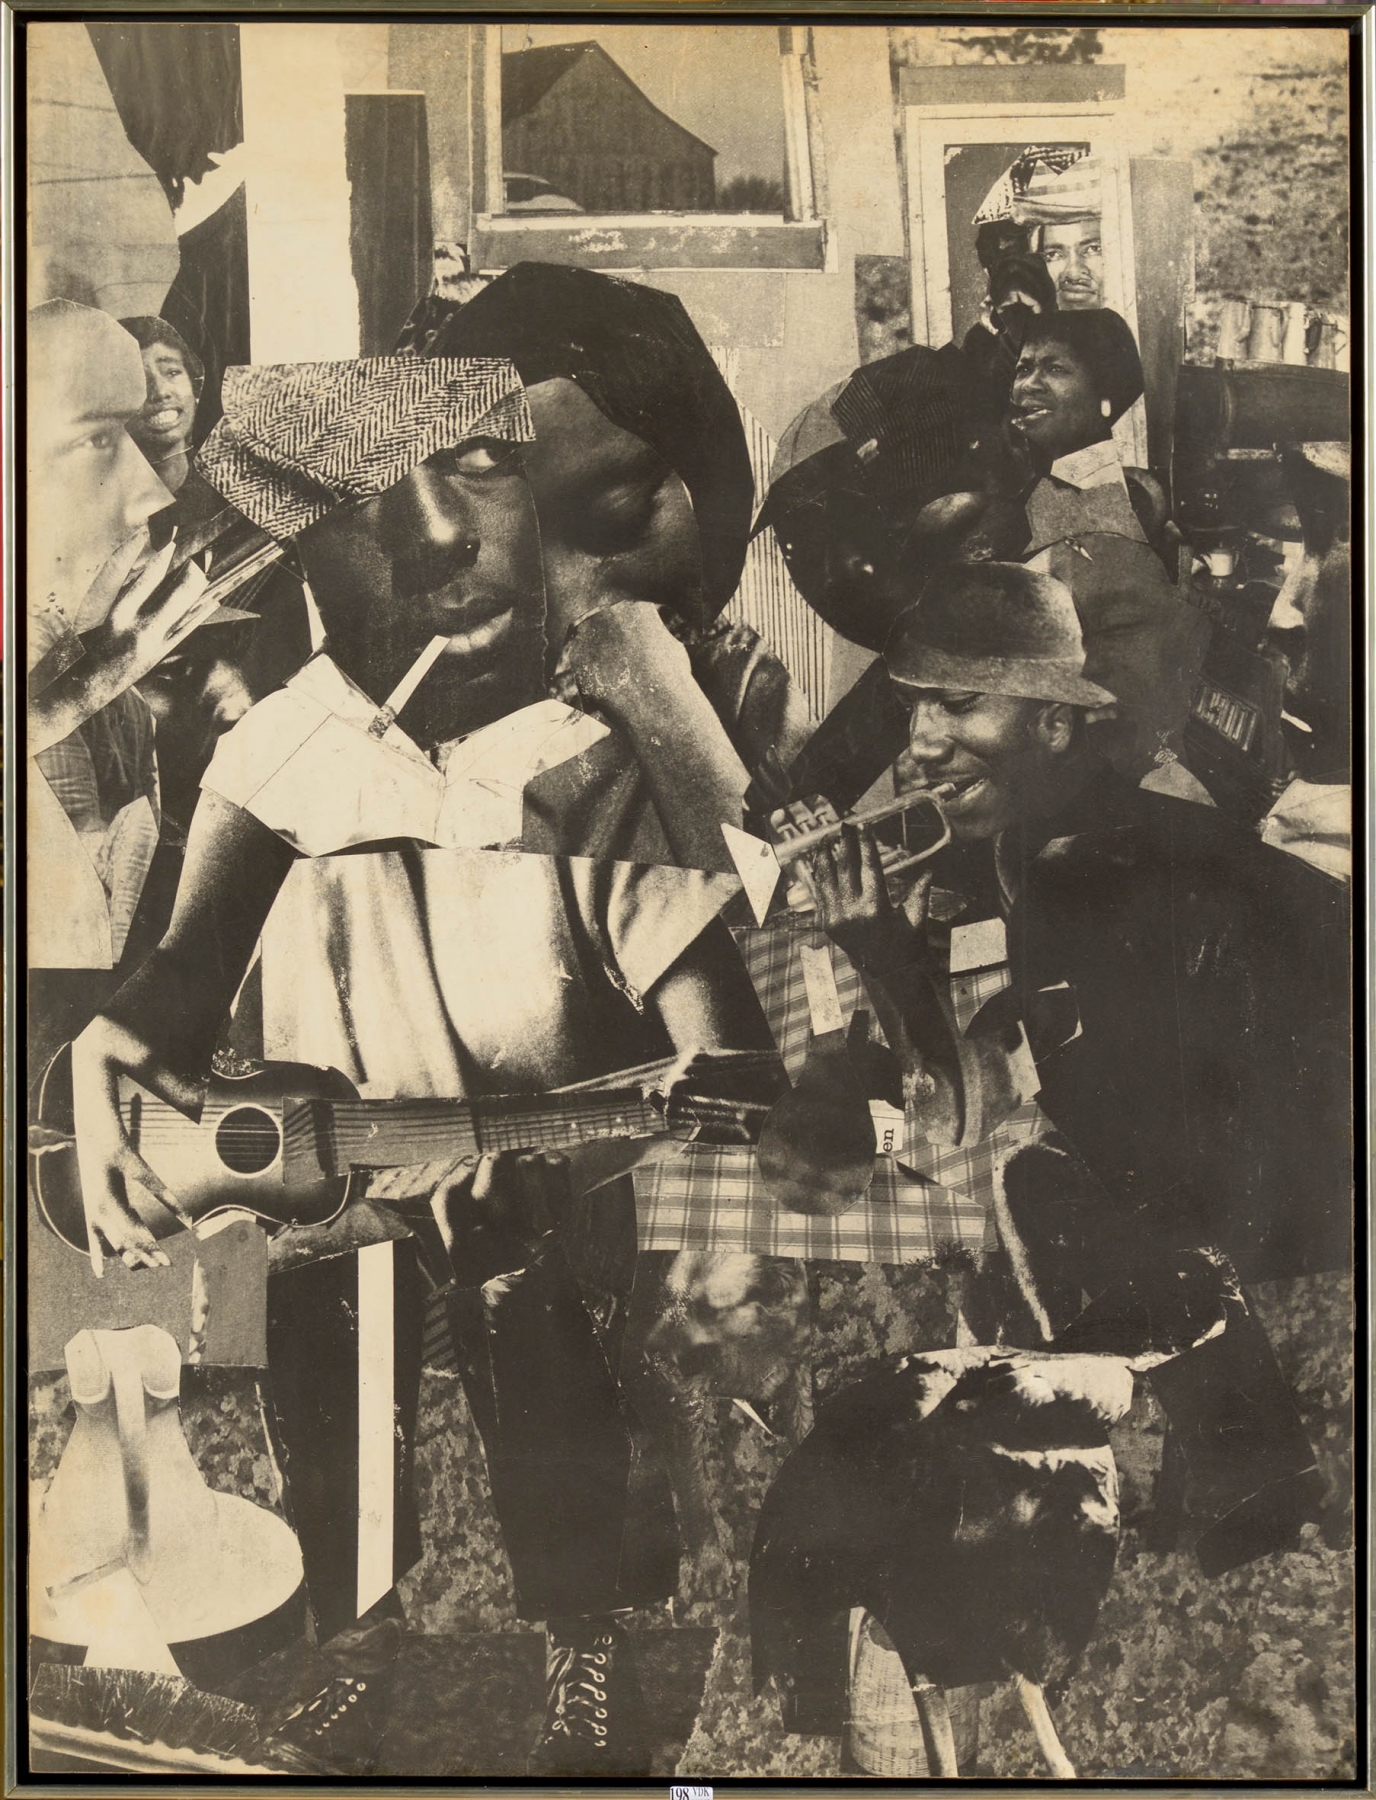 Train Whistle Blues No.2, 1964
Photo-montage on canvas
39.25 x 29.5 in.
Enquire

&amp;nbsp;